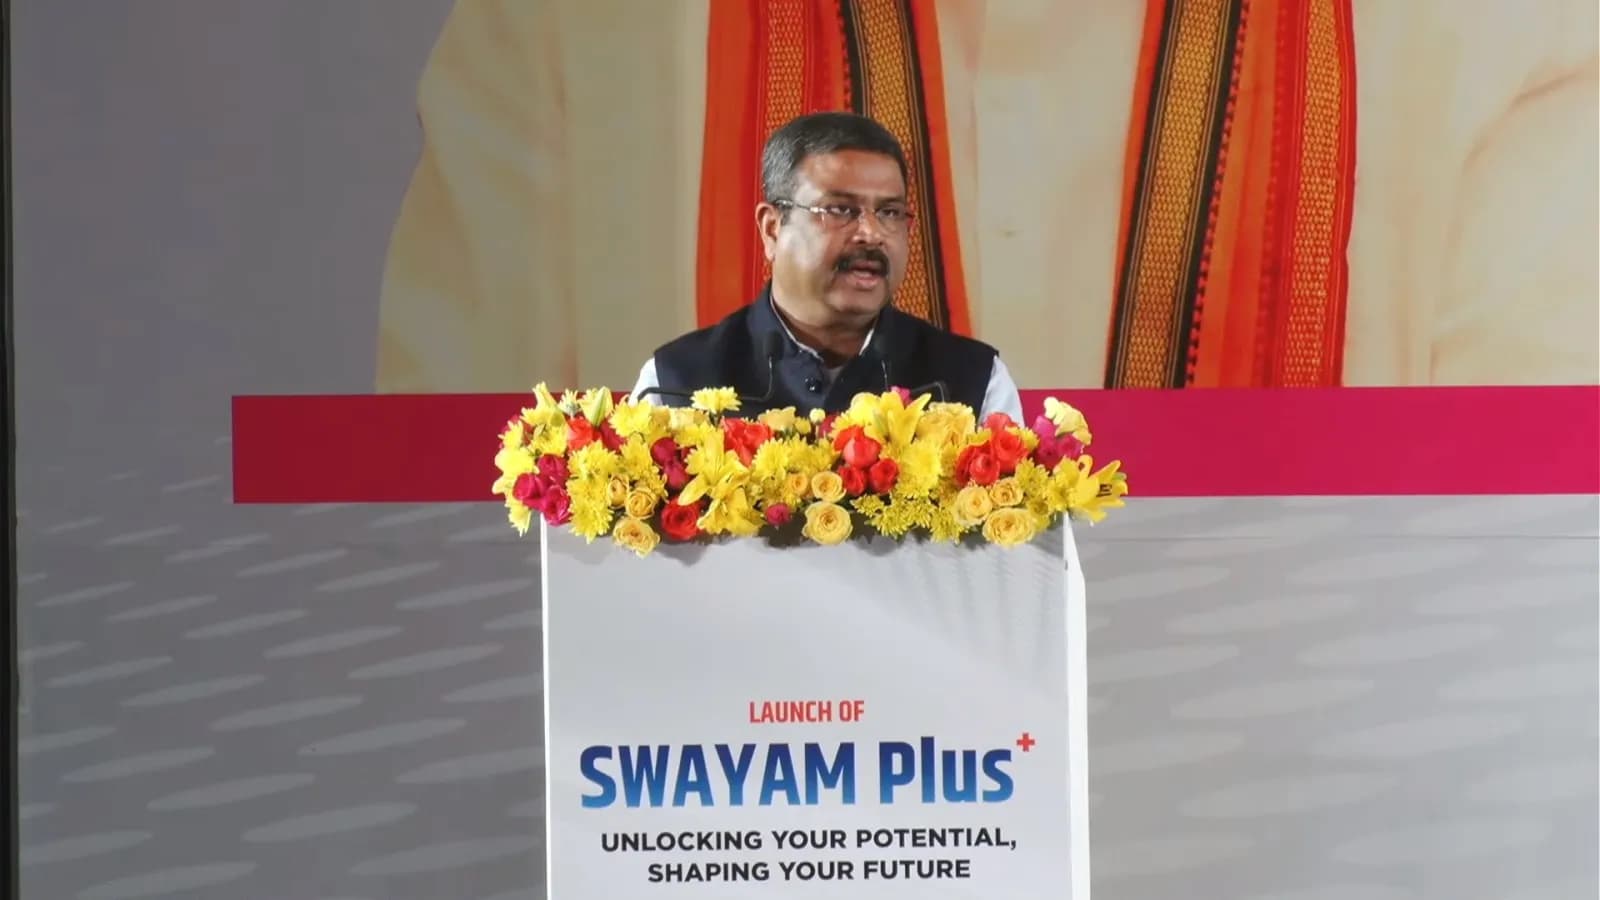 Multilingual content and AI-enabled chatbot to assist the students are some of the features of the SWAYAM Plus platform